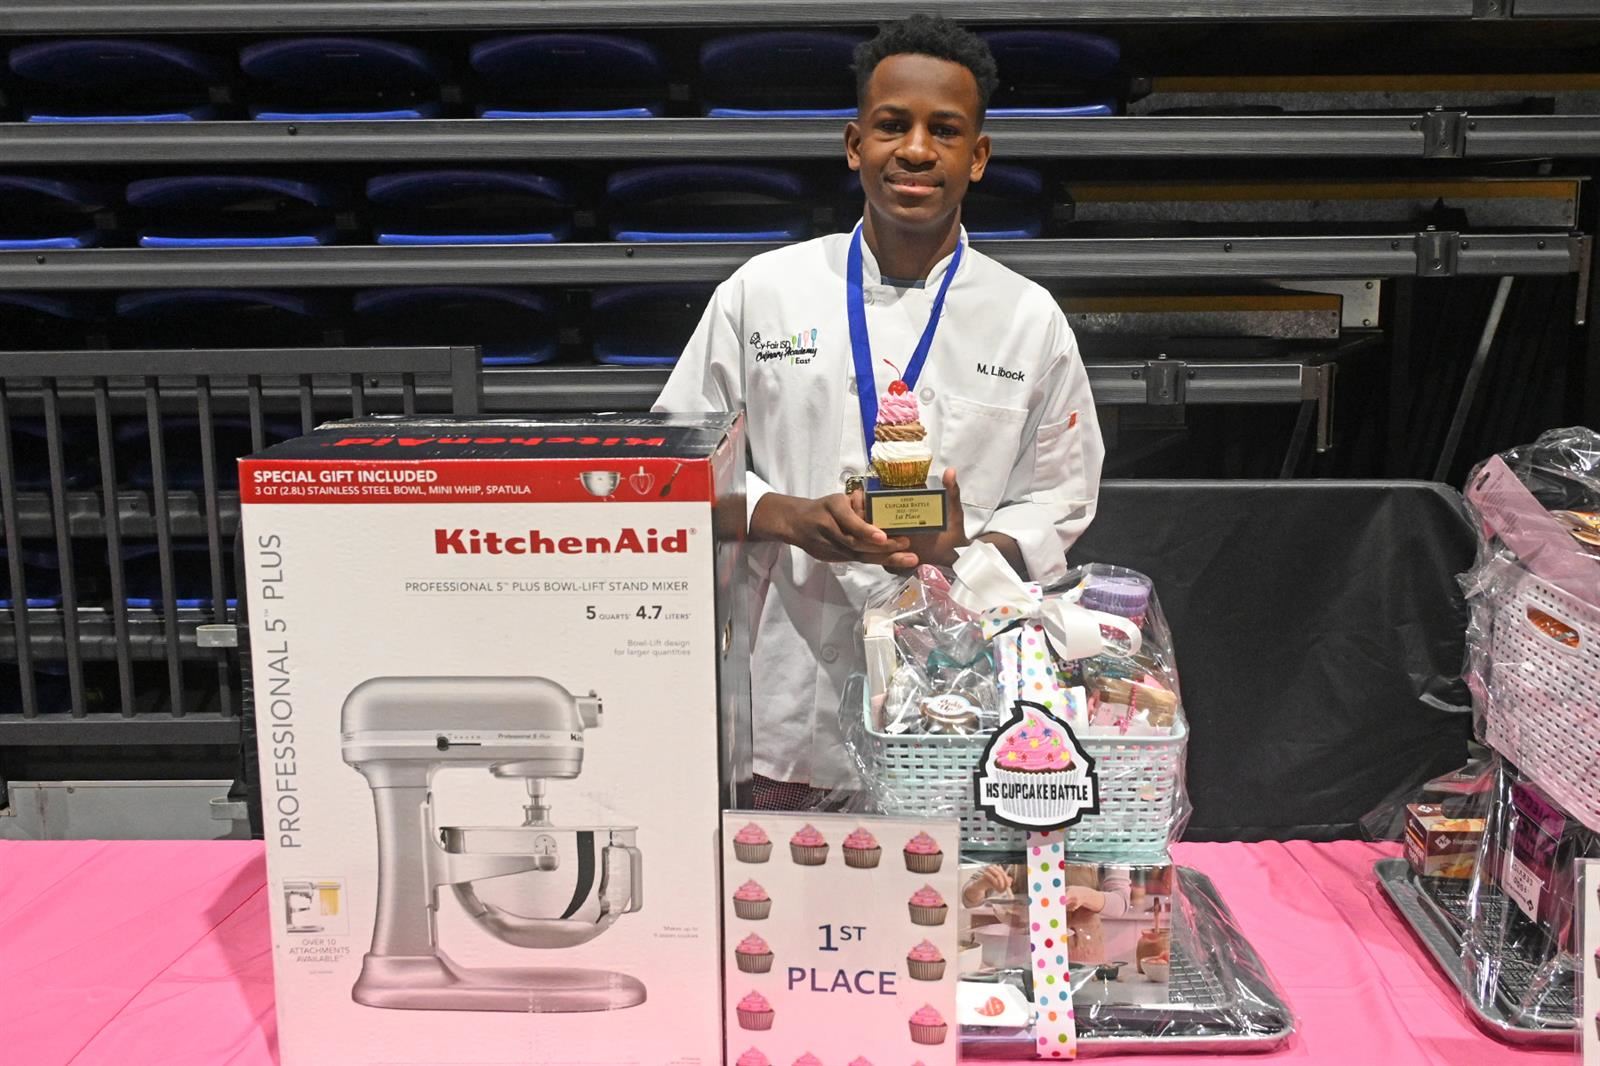  Jersey Village junior Ananda Stephens was among many winners at the fifth annual Cupcake Battle.